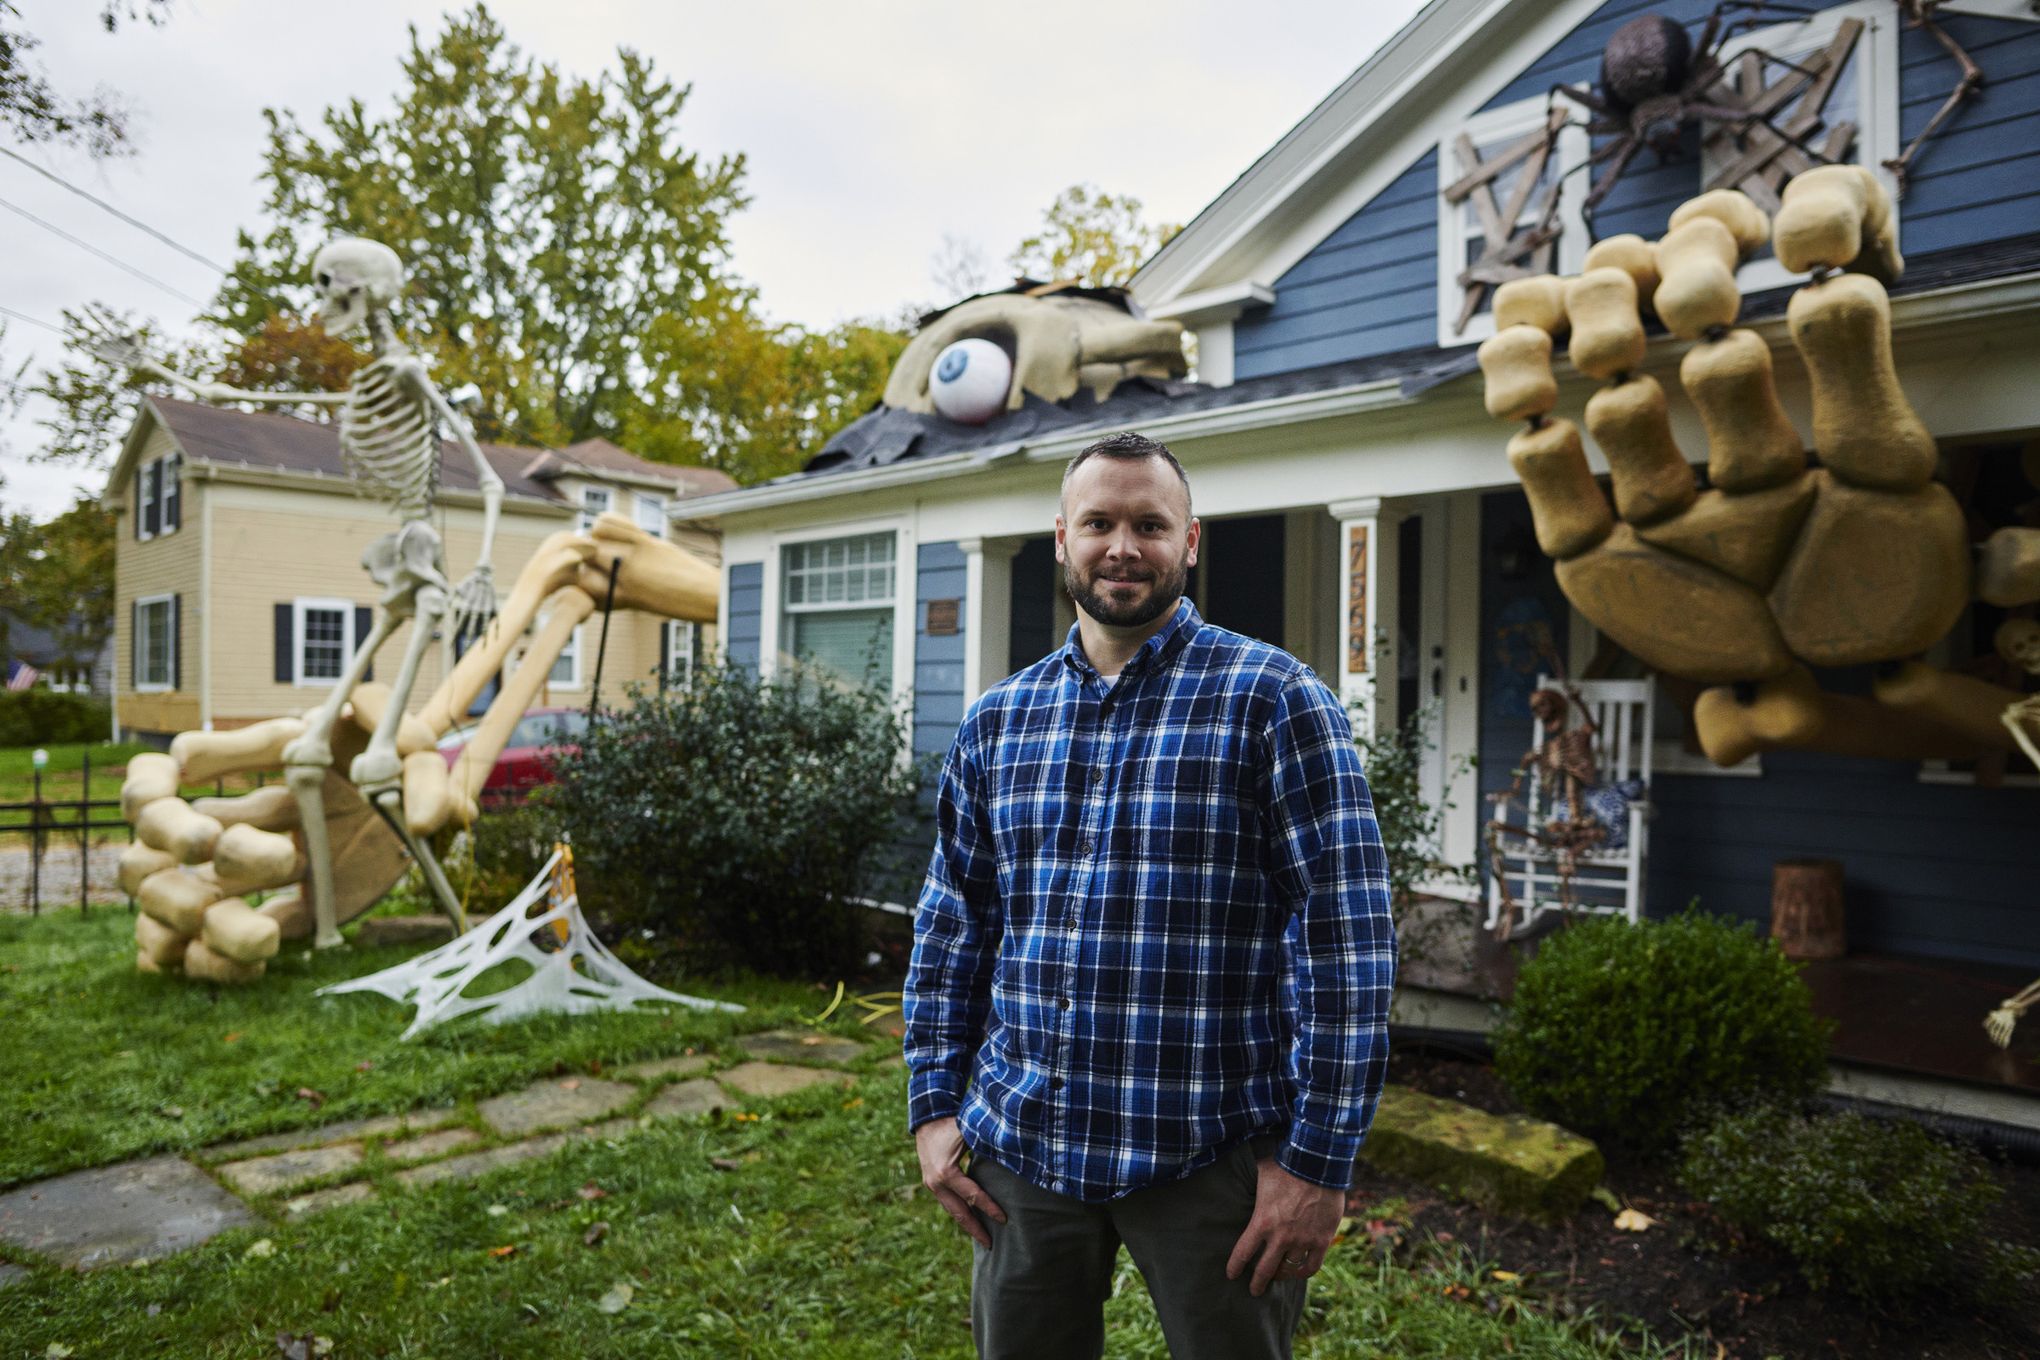 How to Maintain Your 12-Foot Skeleton and Other Giant Halloween